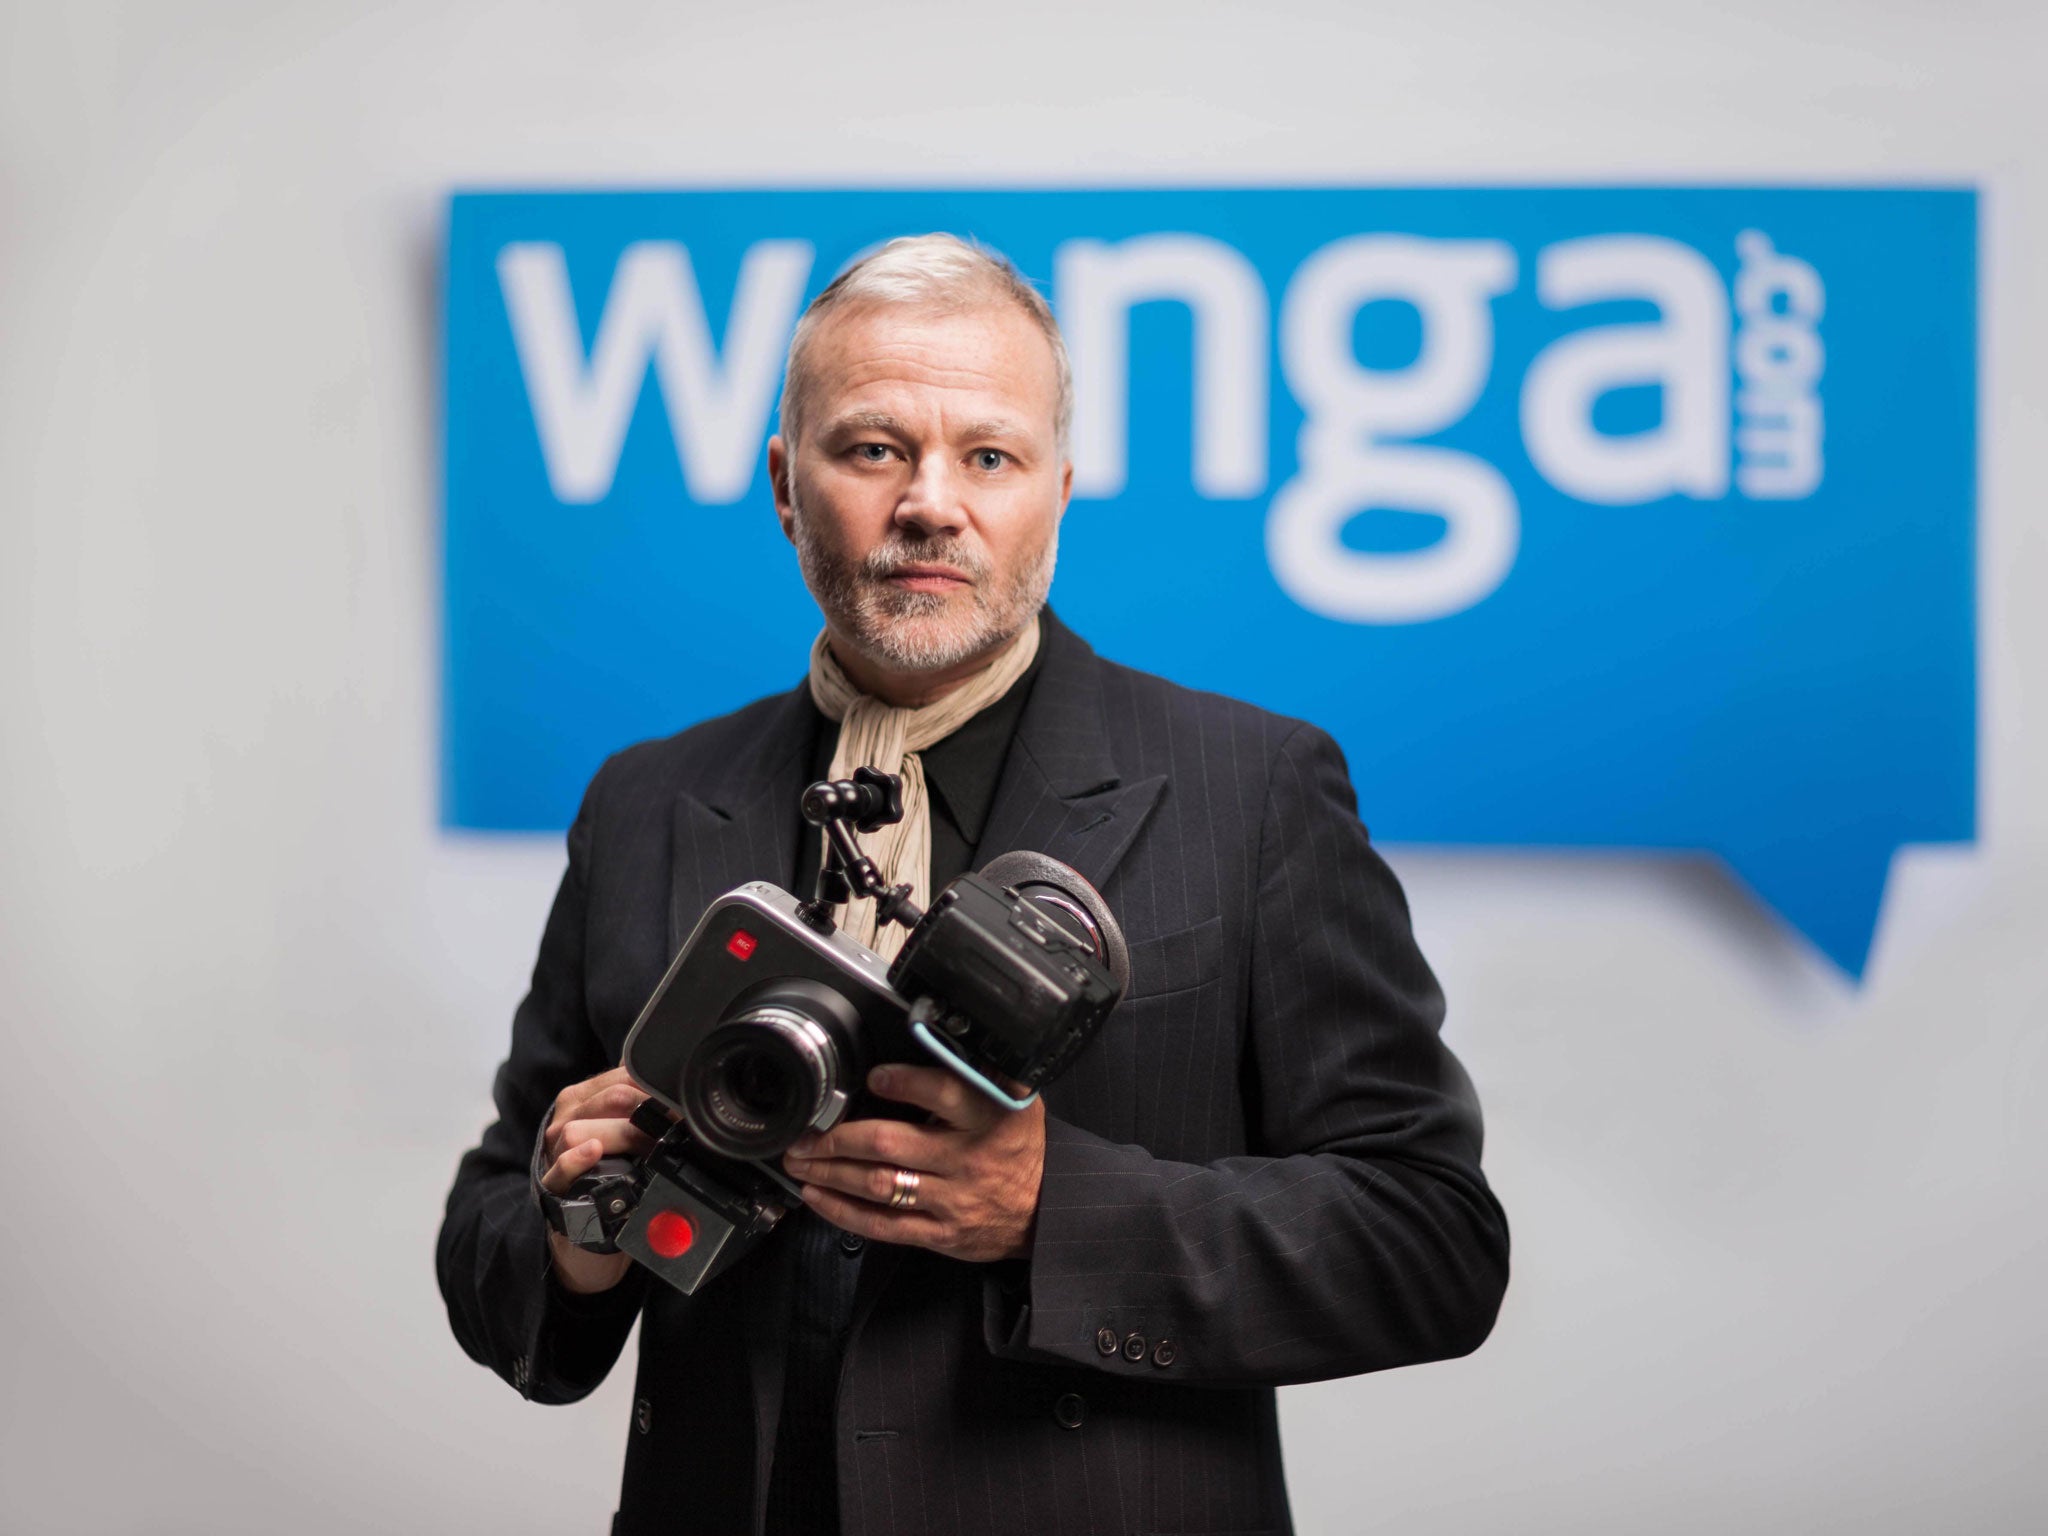 The Bafta-nominated director Gary Tarn has been brought behind the scenes at Wonga to make the film ‘12 Portraits’